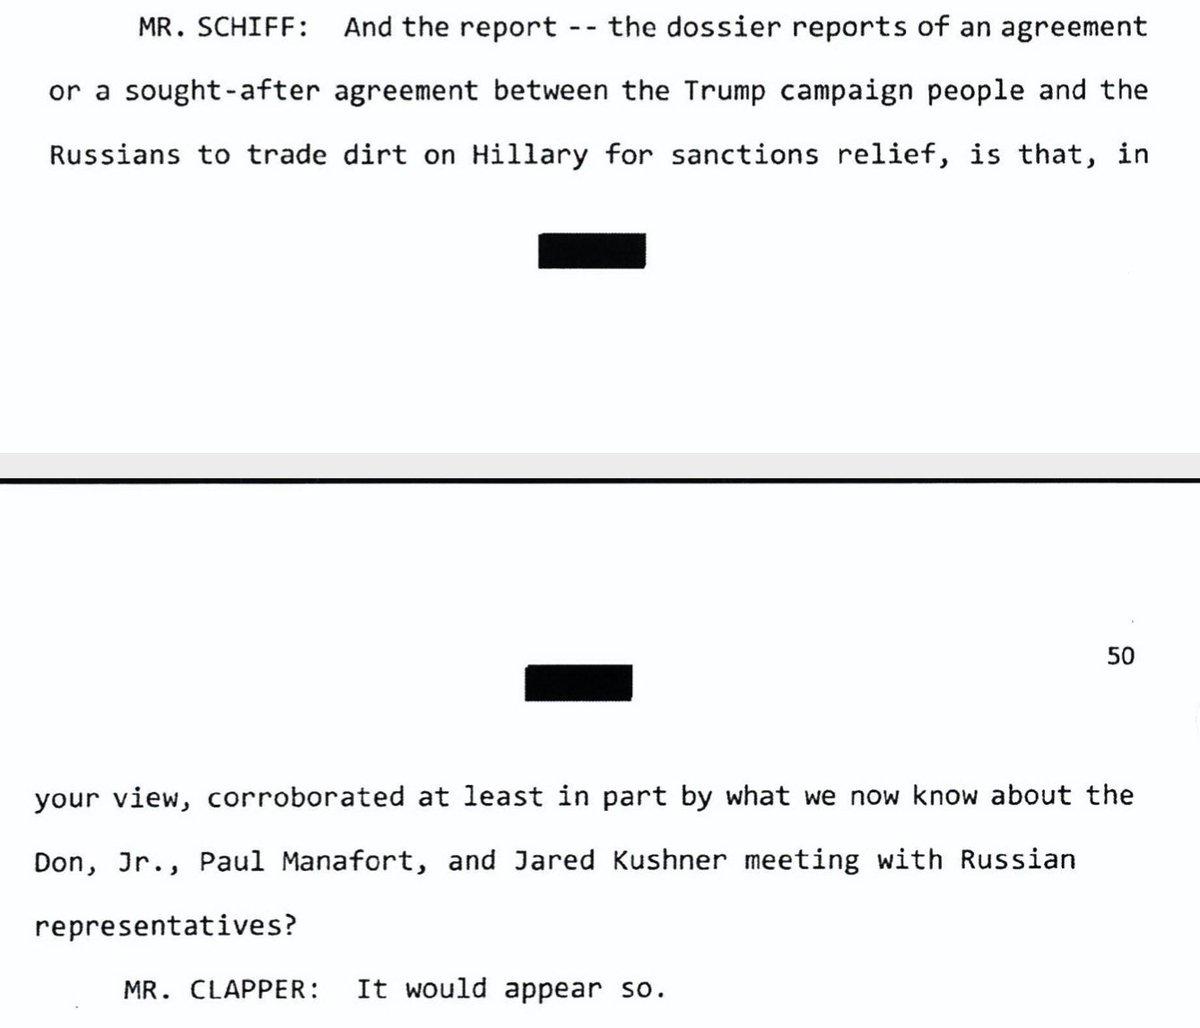 SCHIFF: And that bit in The Dossier about Russian dirt on Clinton for sanctions relief, that sounds like the June 9, 2016 meeting, right?CLAPPER: Yup! Just about!